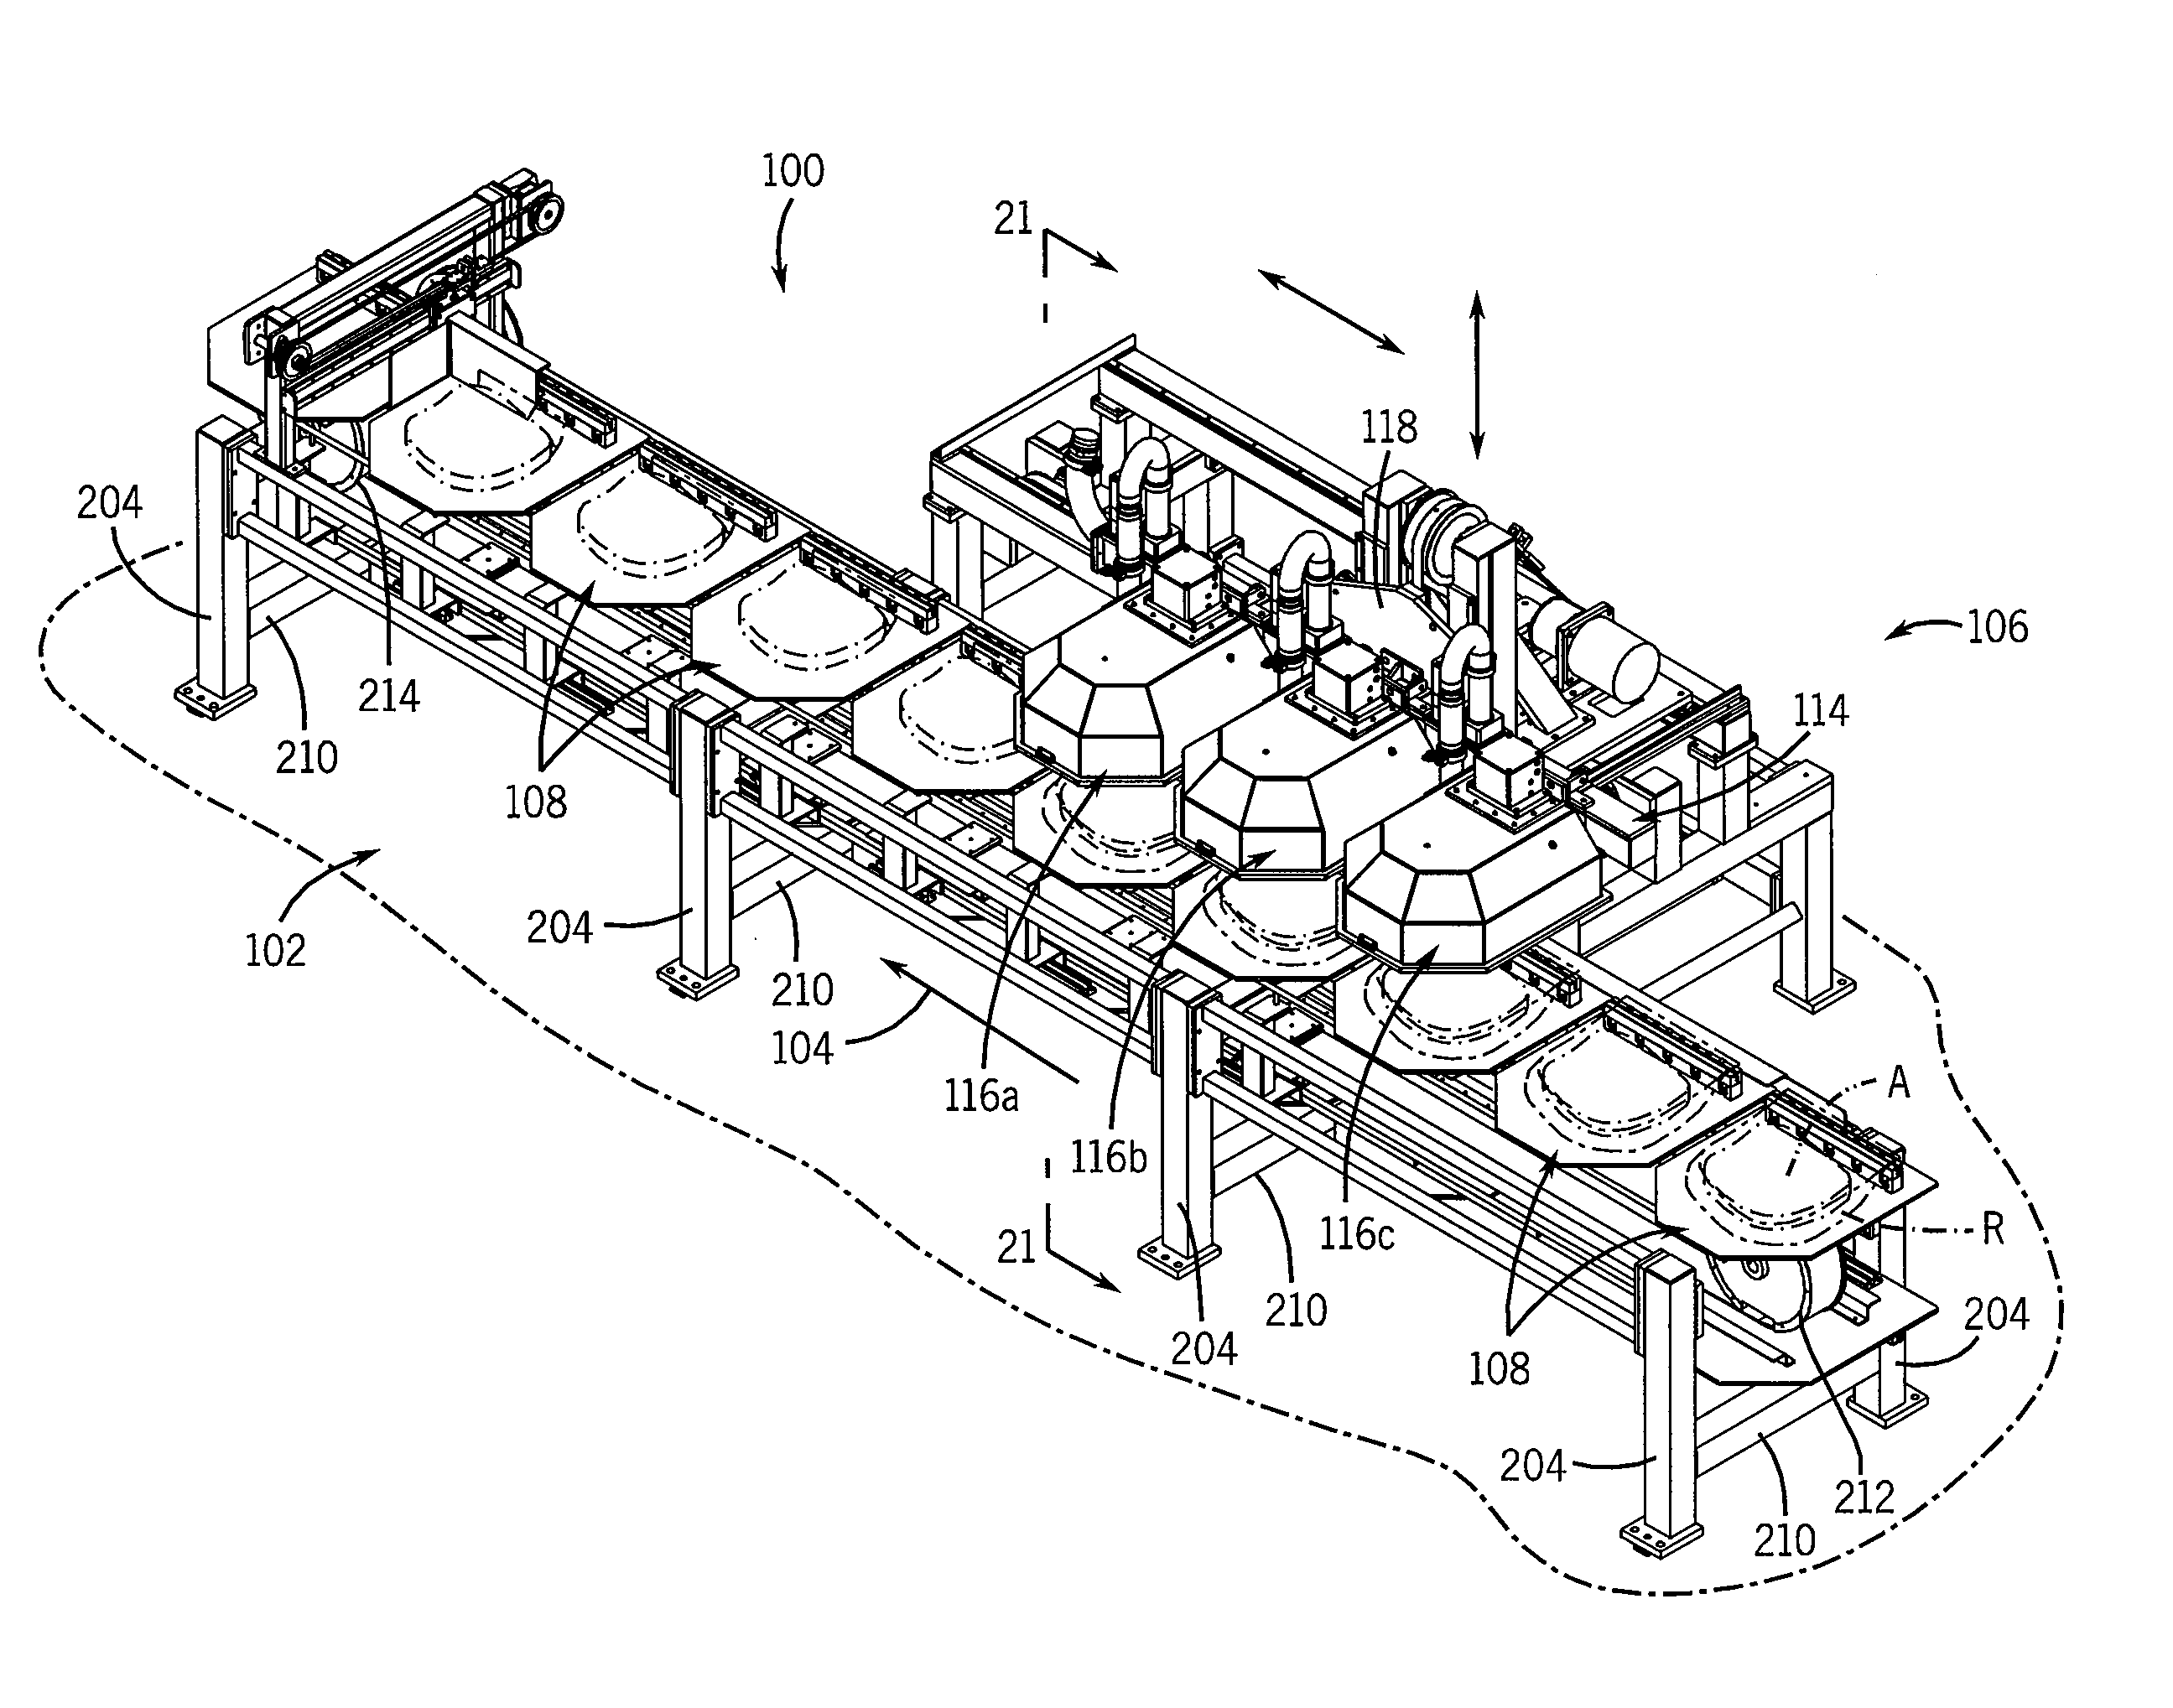 Combination vacuum manifold and support beam for a vacuum packaging system